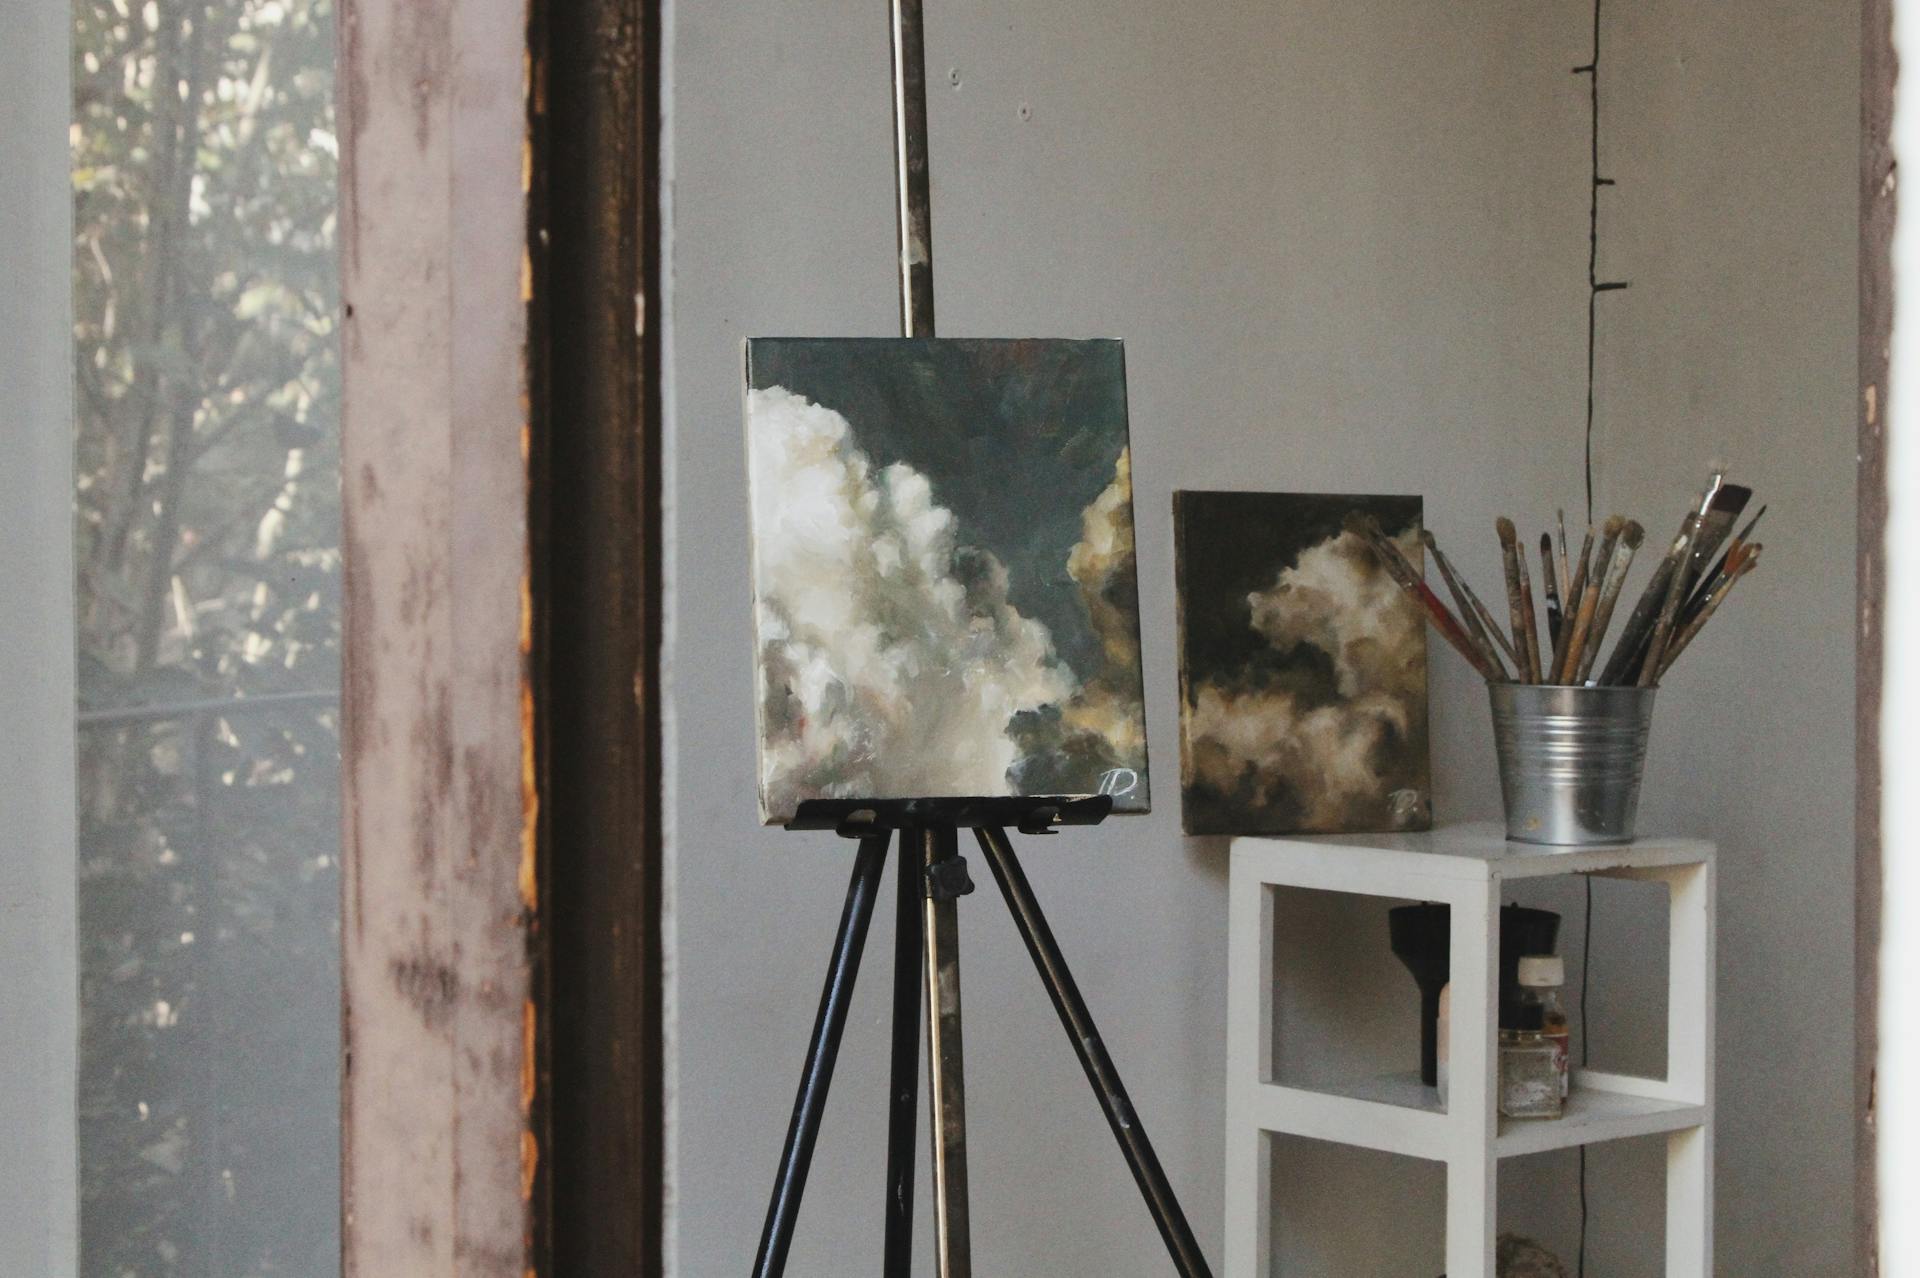 A canvas on an easel | Source: Pexels